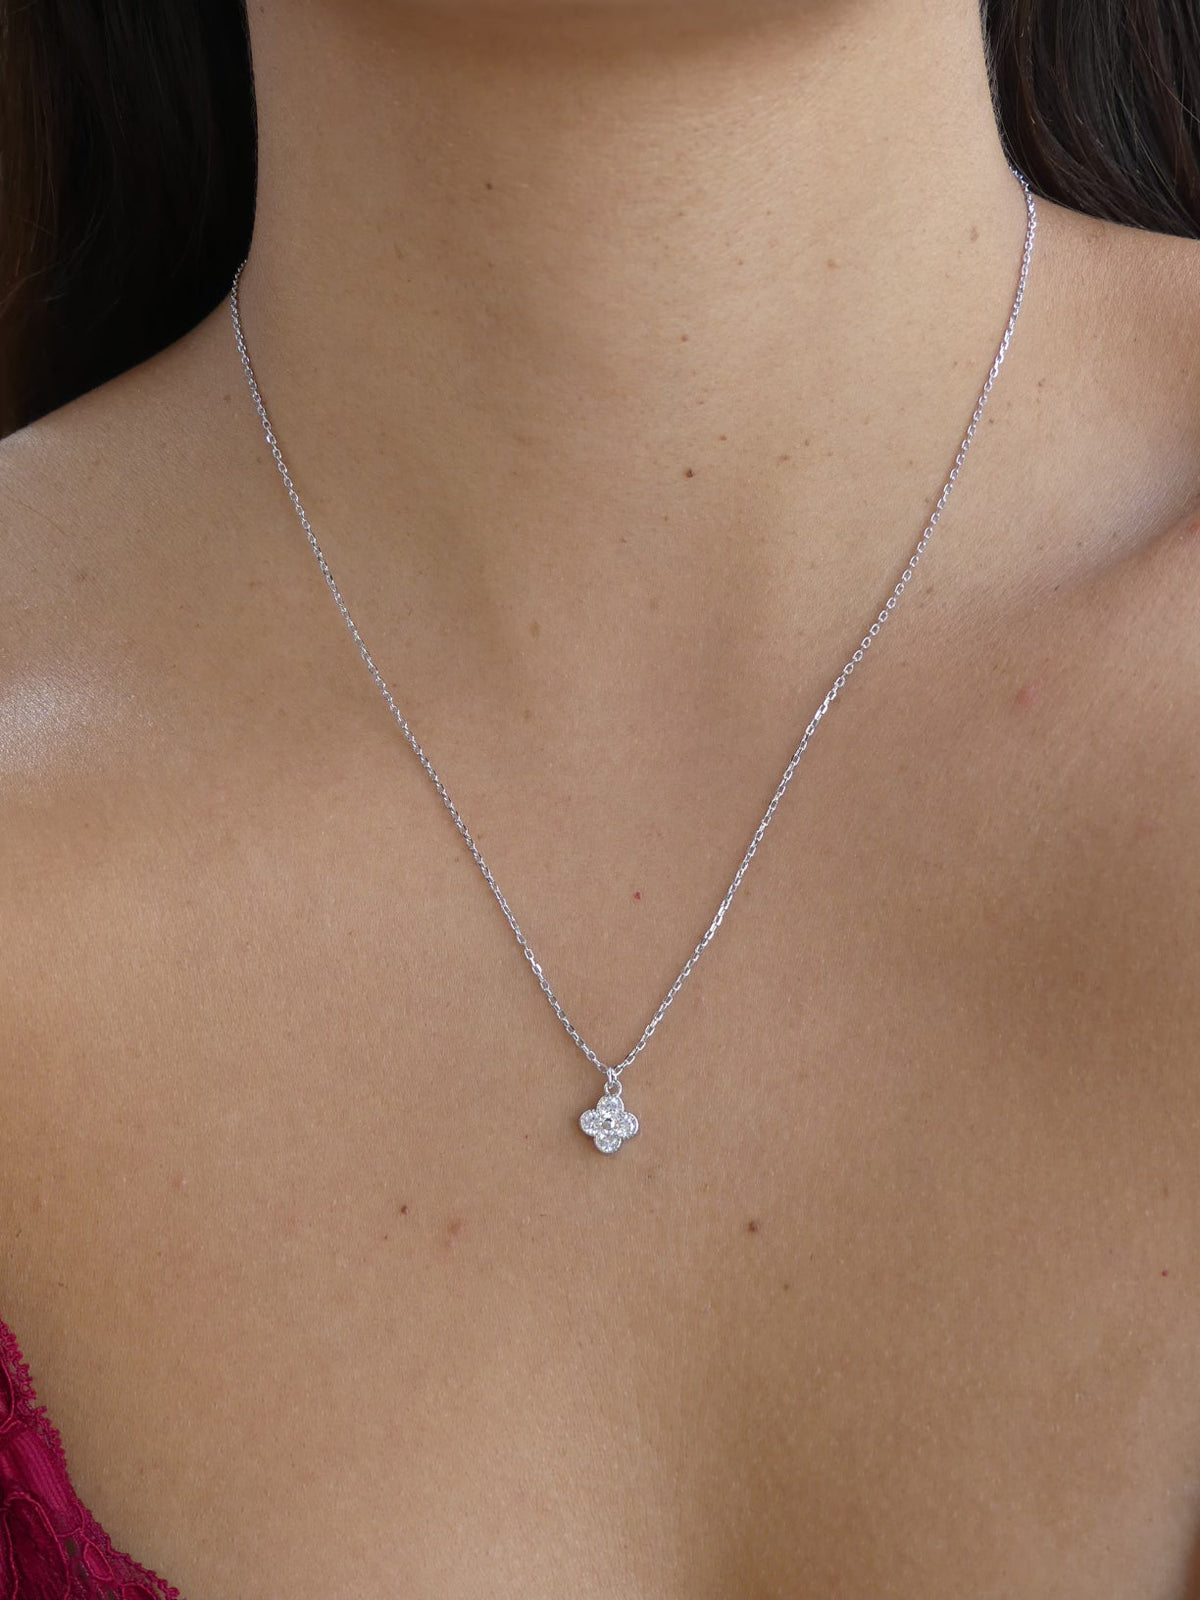 Flower necklace or clover diamond cz sterling silver .925 necklace, dainty, waterproof everyday necklaces simple and dainty. gift ideas for best friend, best friend jewelry; necklaces that will not tarnish or turn green for cheap good quality. Trending necklaces on instagram reels and tiktok shopping in Miami - Kesley Boutique